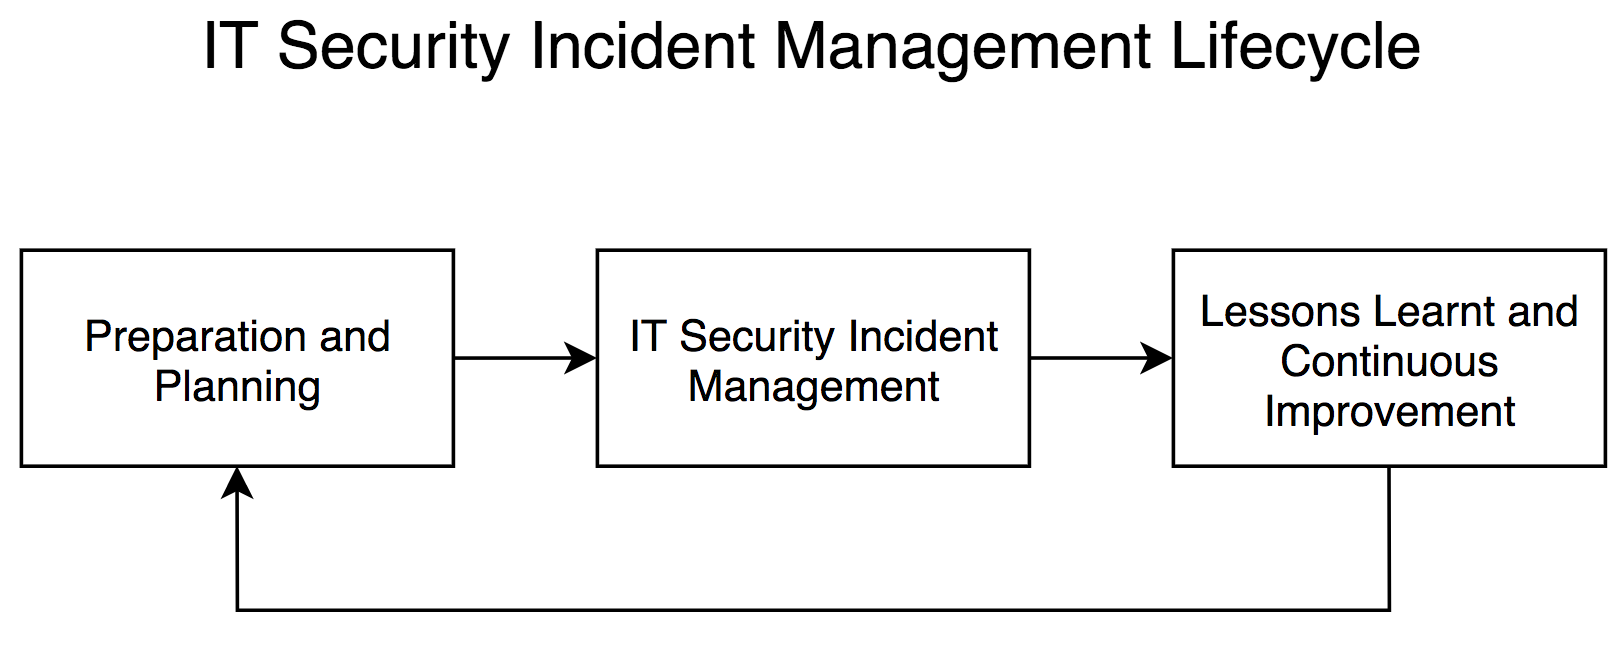 IT Security Incident Management Lifecycle